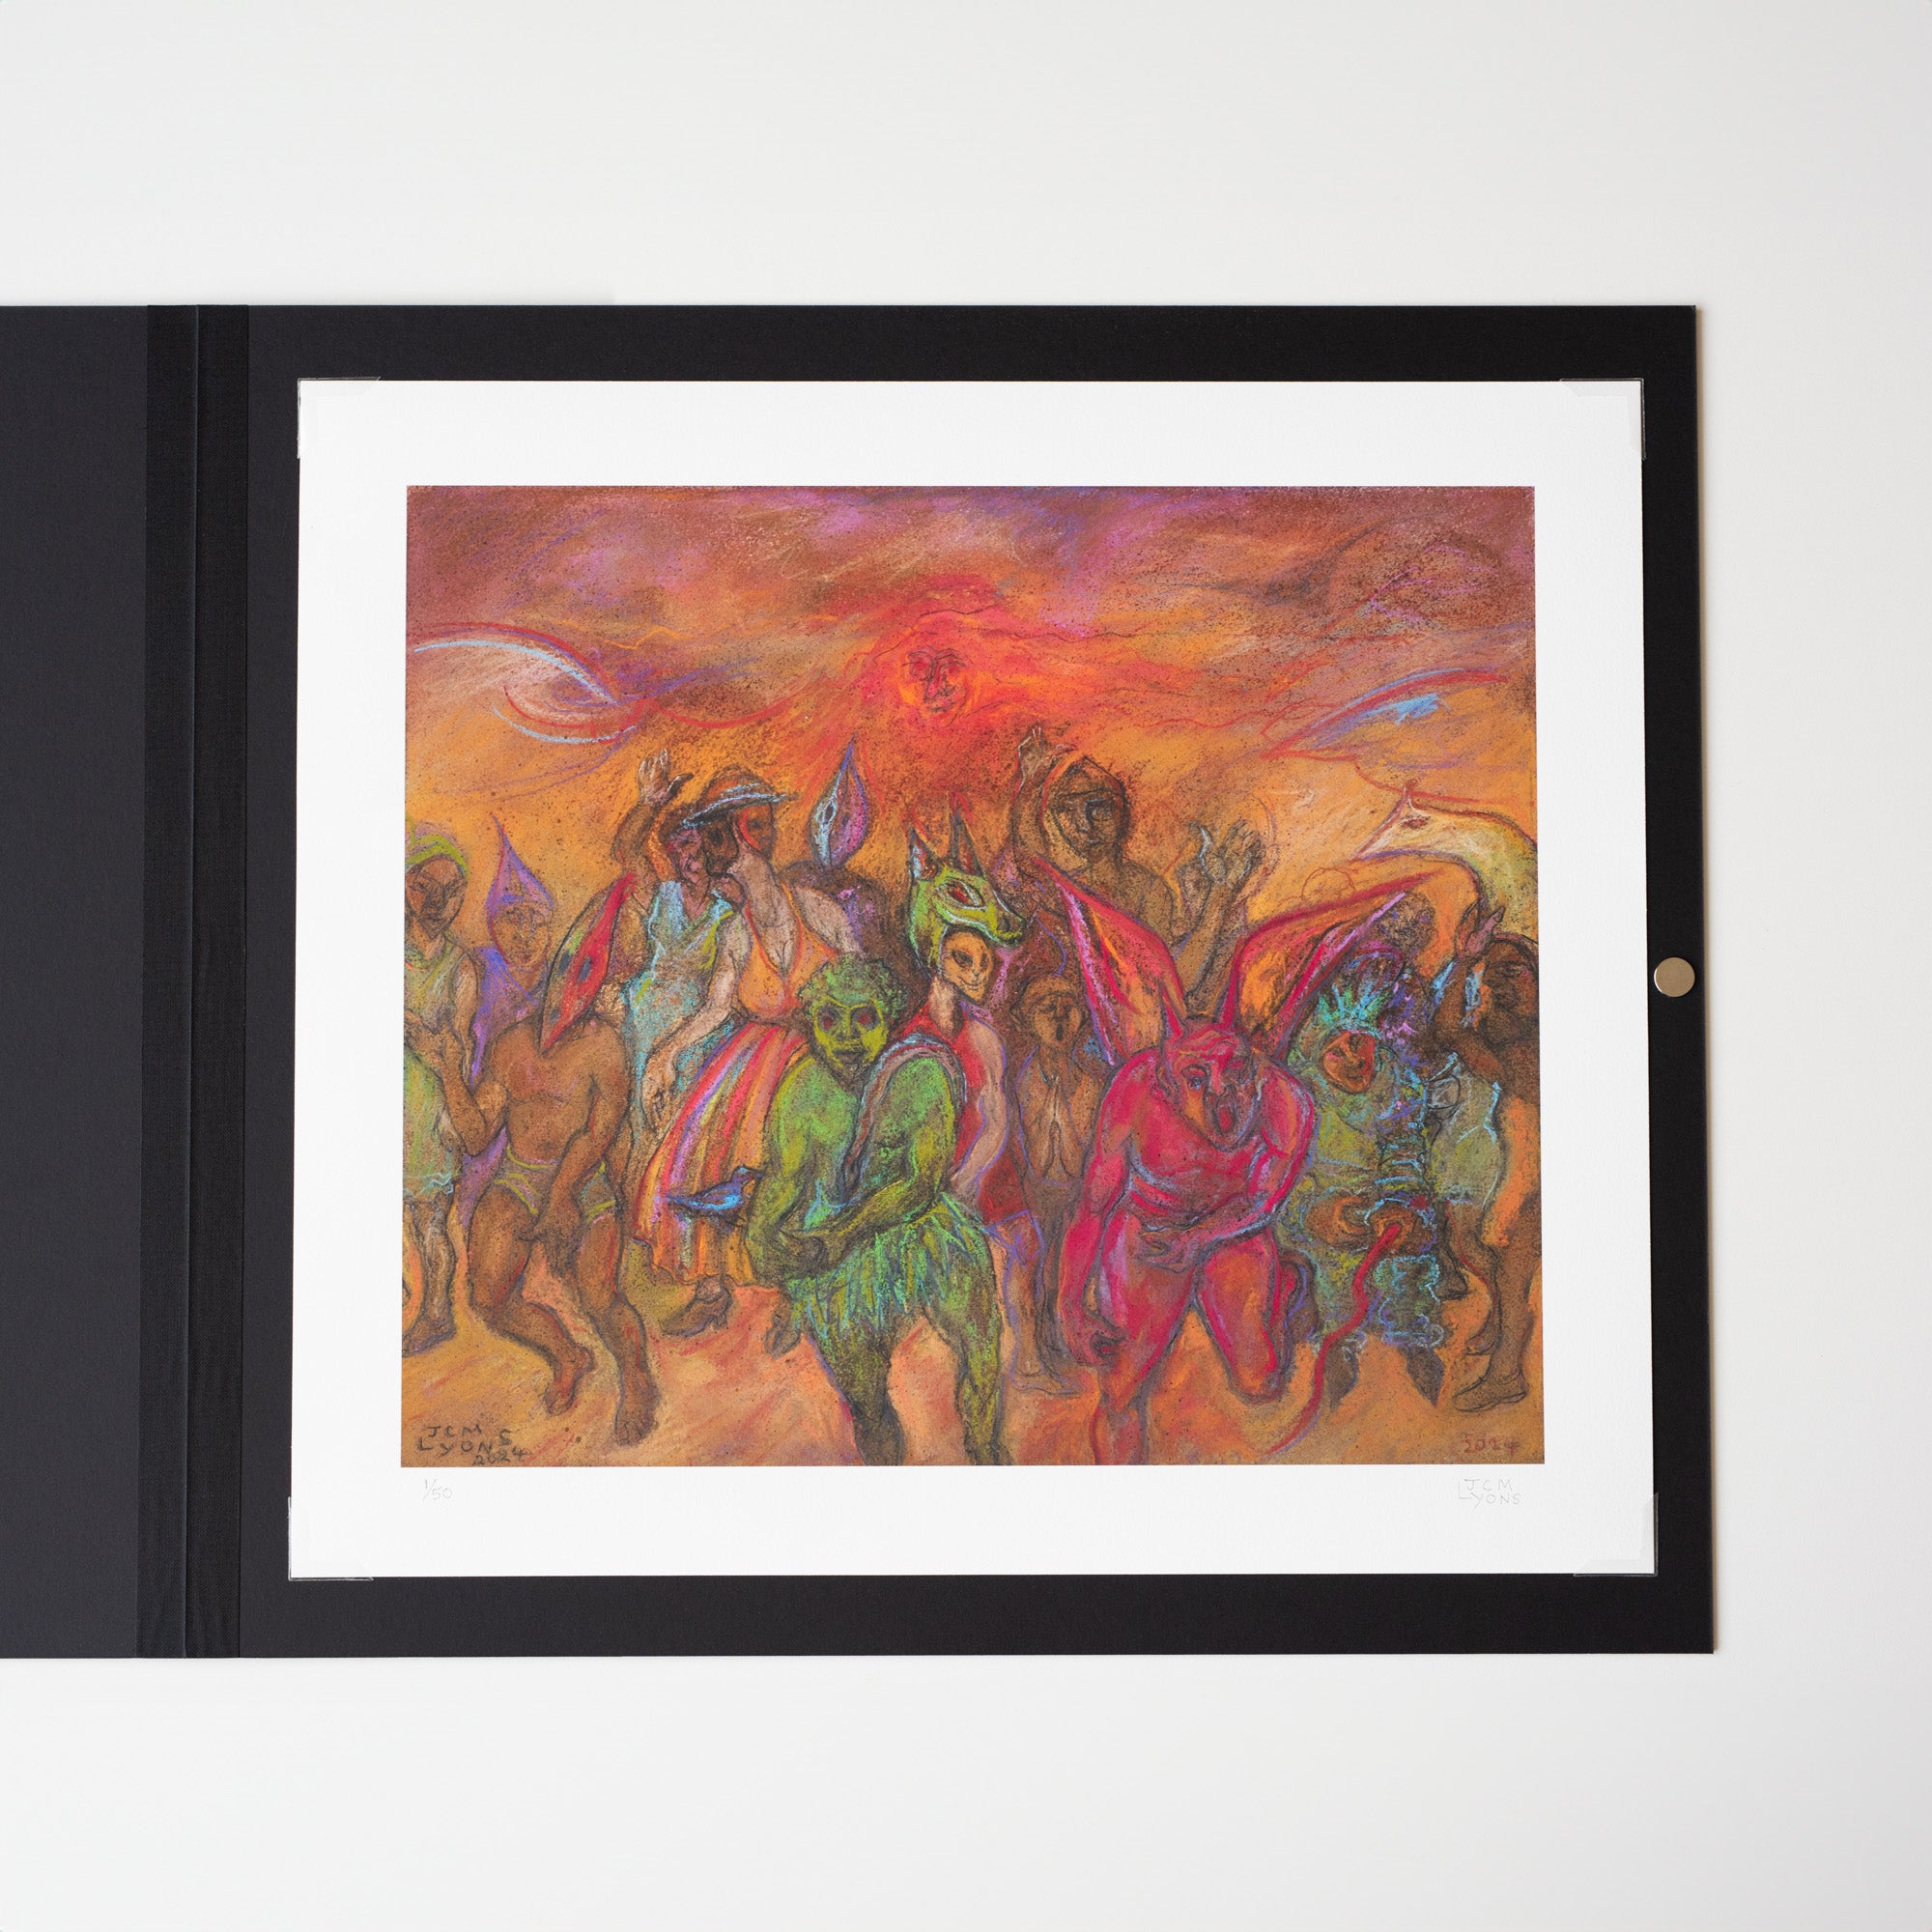 Print reproduction of a red, orange and green painting by John Lyons, featuring a group of figures wearing masks and dancing. Placed inside a black portfolio case with a silver magnet fastening.